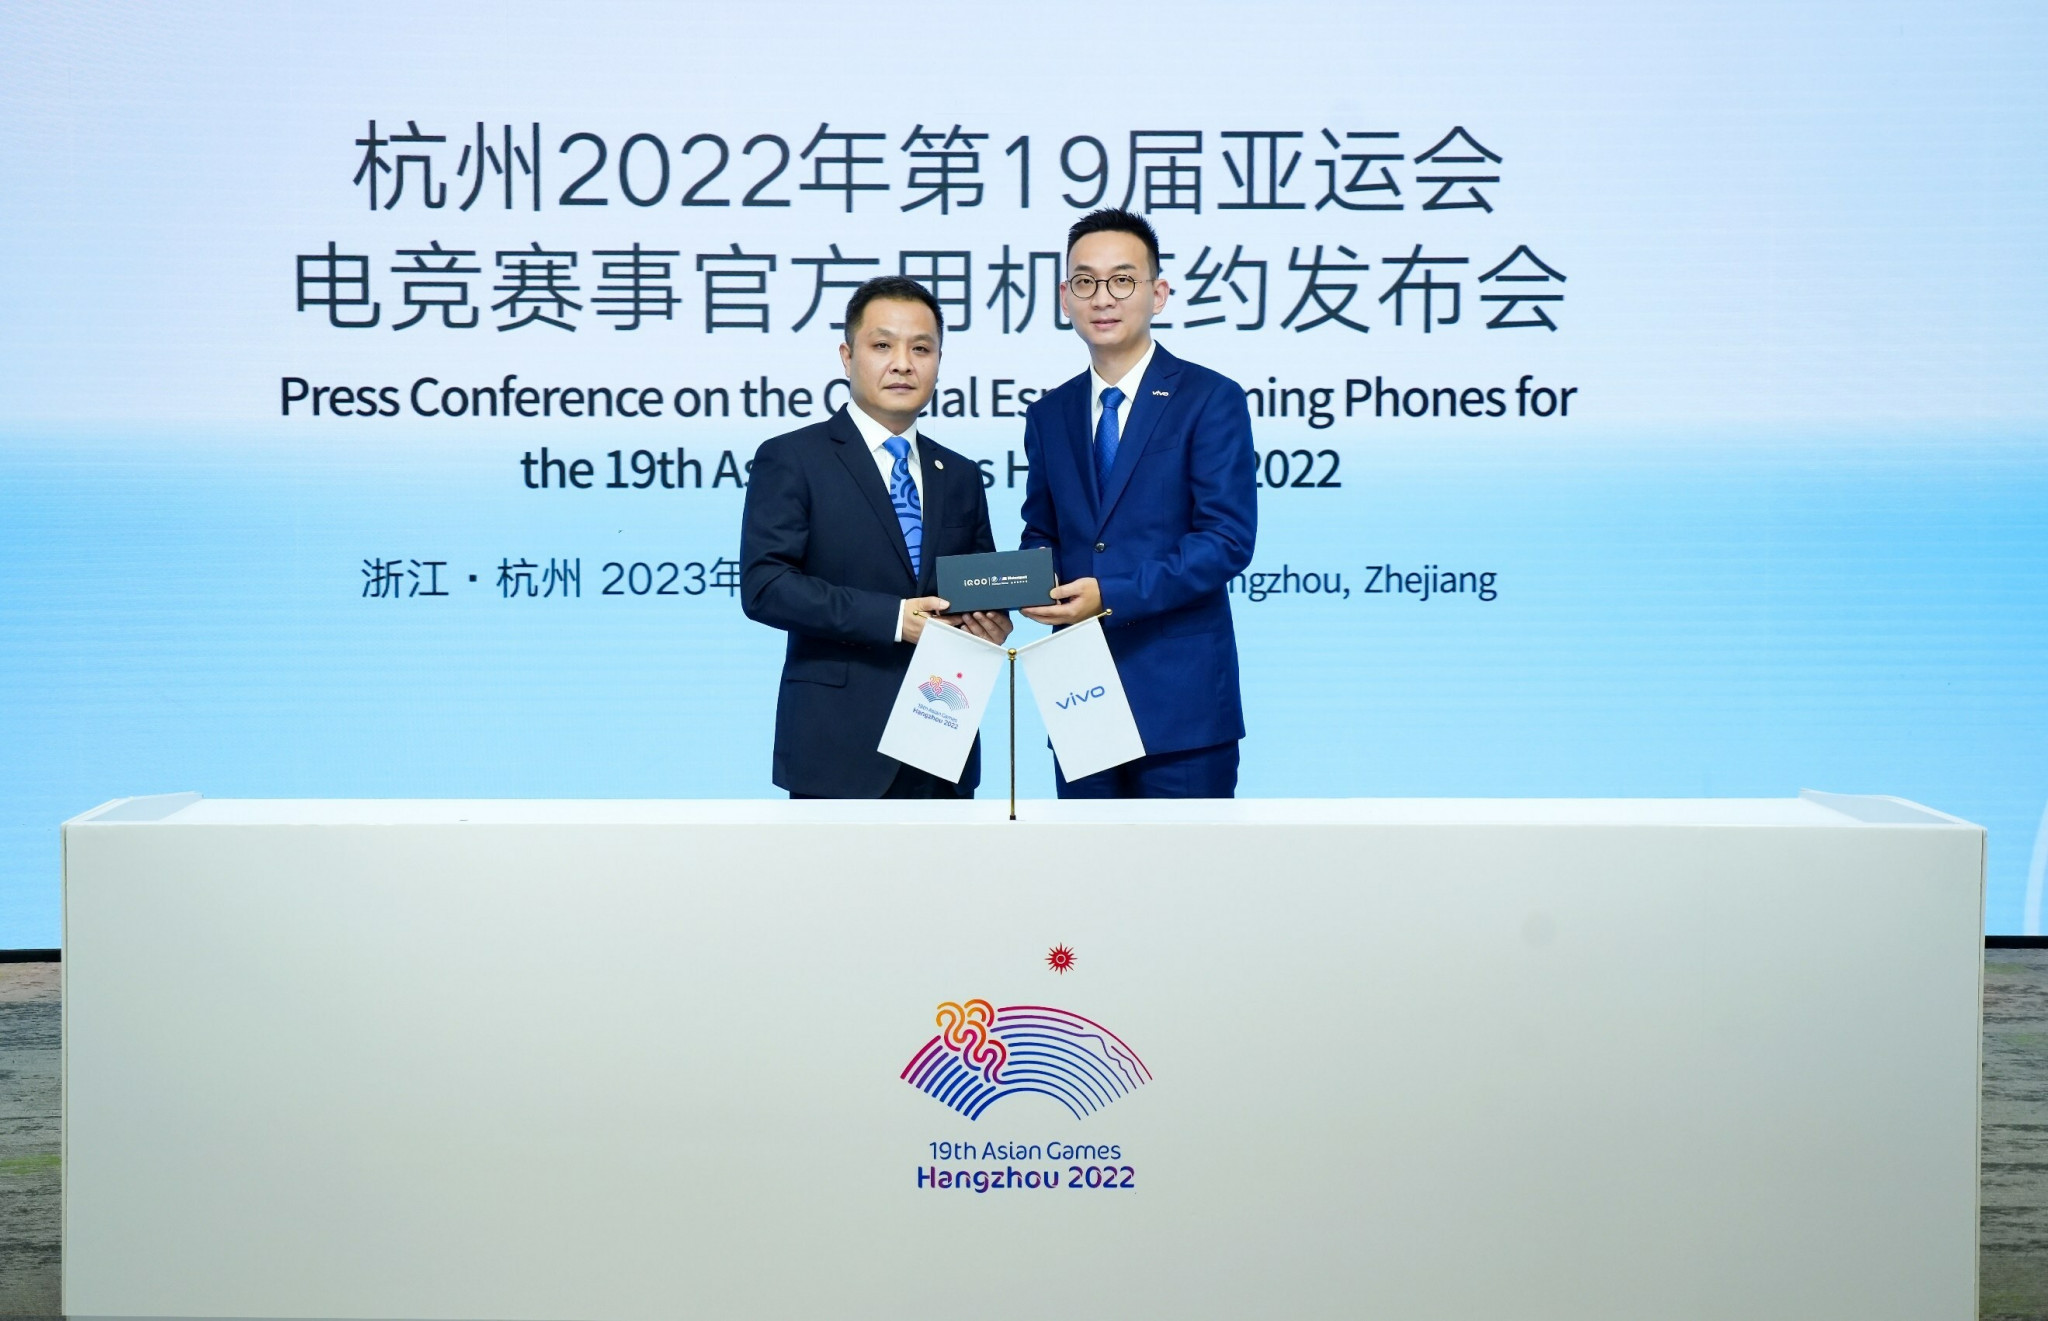 An official esports gaming phone is part of the deal between Vivo and Hangzhou 2022 ©Hangzhou 2022